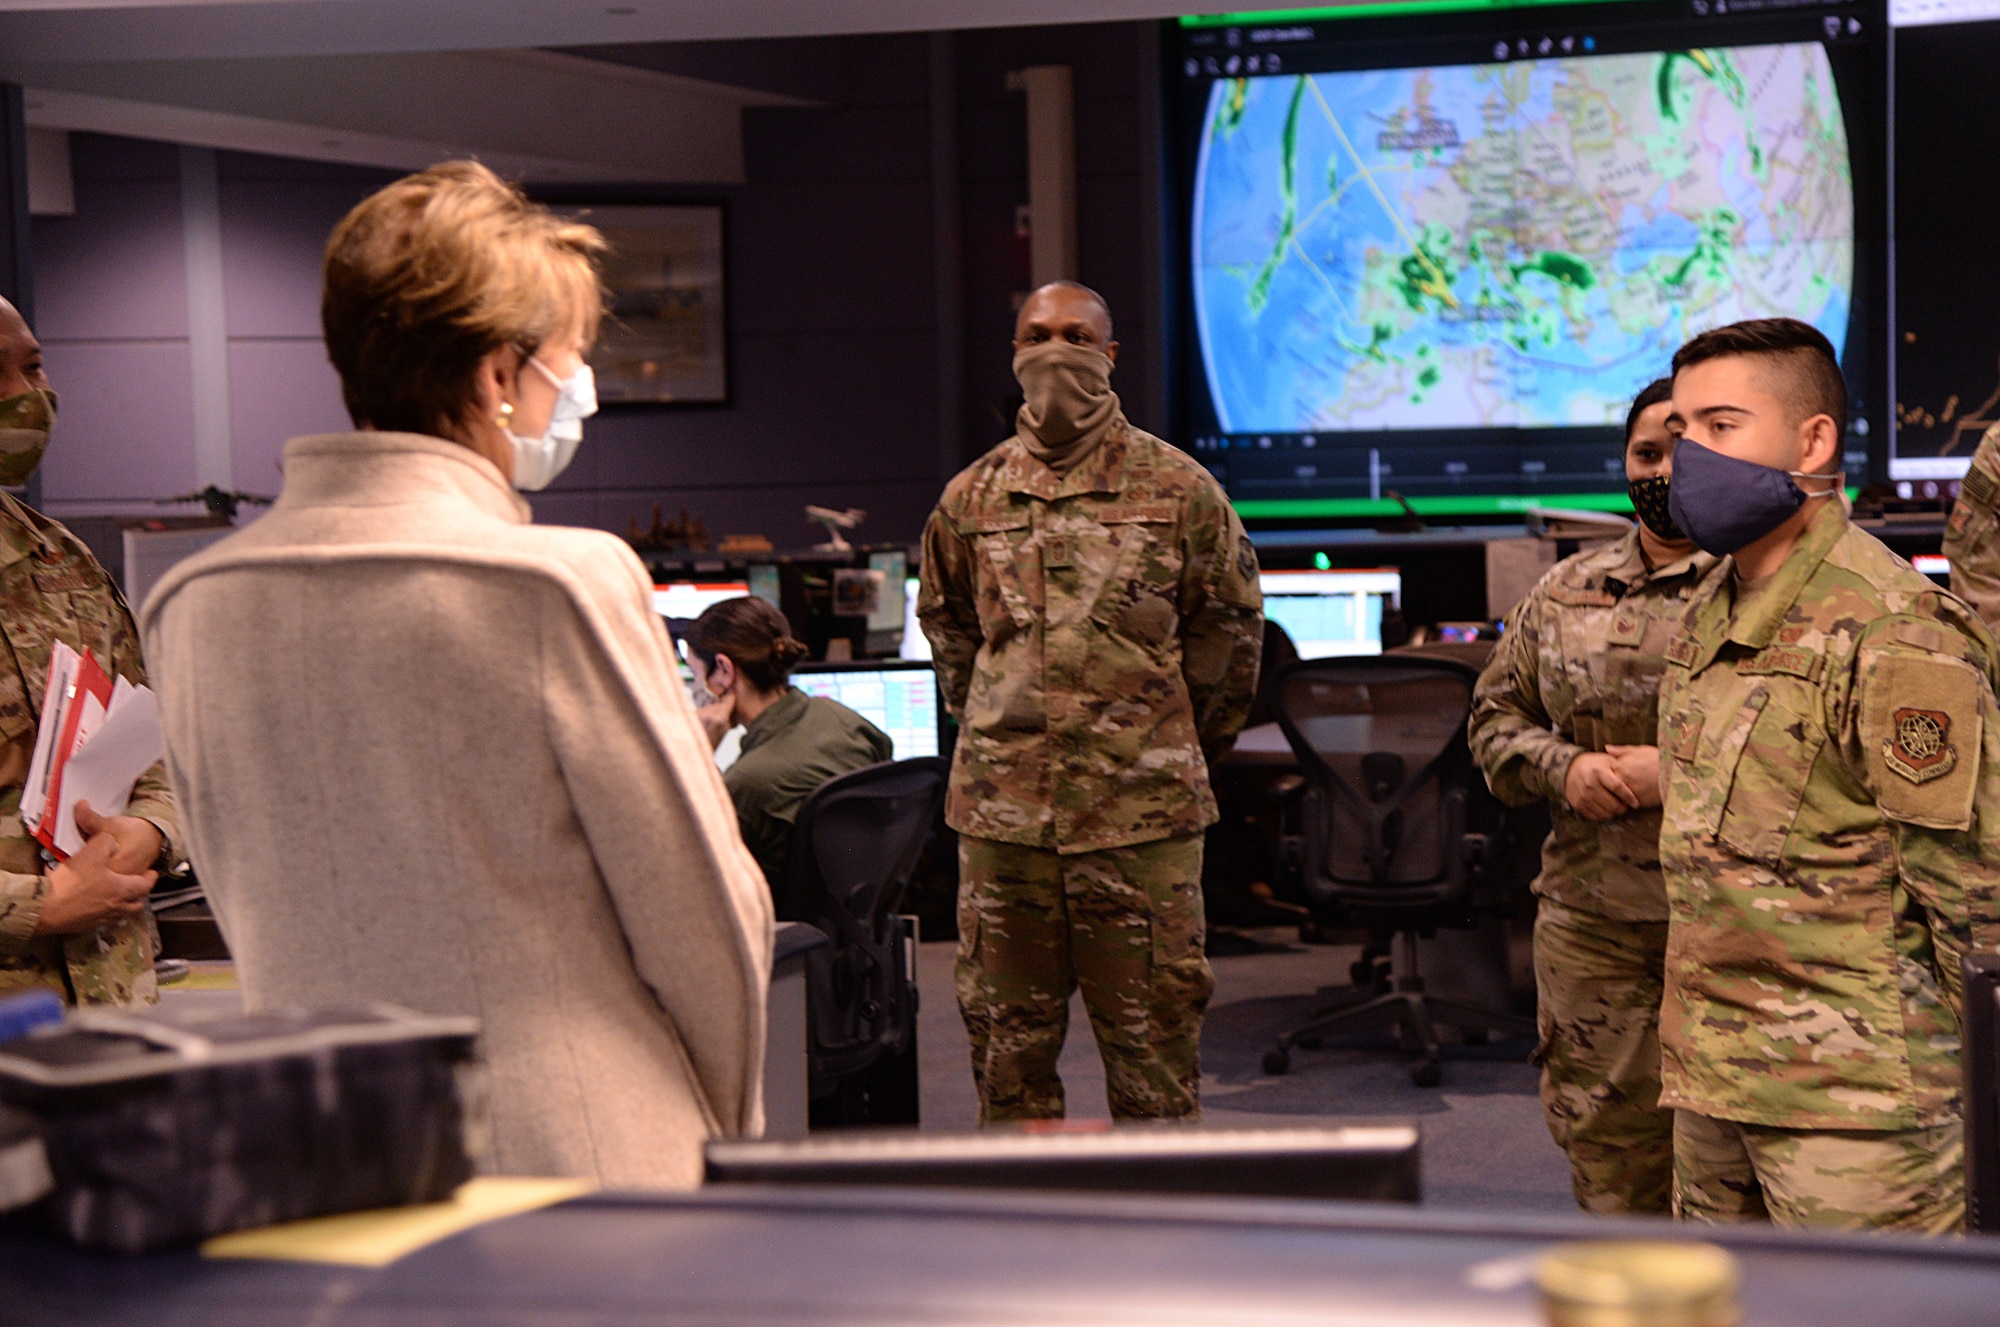 The Honorable Barbara M. Barrett, Secretary of the Air Force, meets 618th Air Operations Center personnel at Scott Air Force Base, Illinois, April 21, 2020. Barrett visited the 618th AOC, Air Mobility Command’s execution arm for providing America’s global reach, to see how the team continues to accomplish their mission in light of social distancing requirements. (U.S. Air Force photo by Master Sgt. Mike Andriacco)